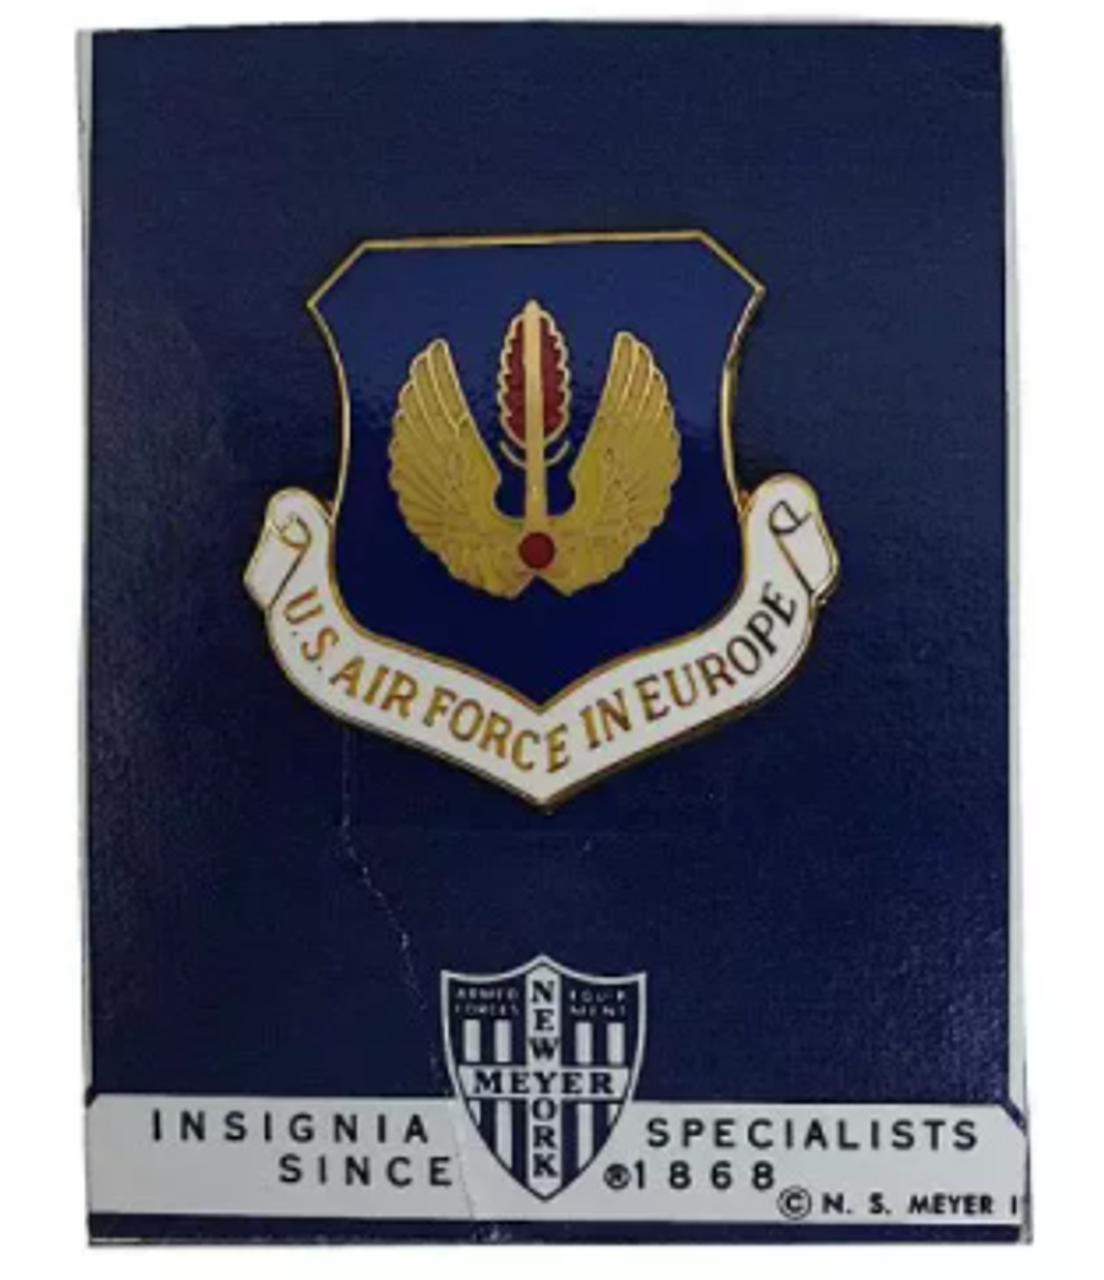 US Air Force in Europe Pin